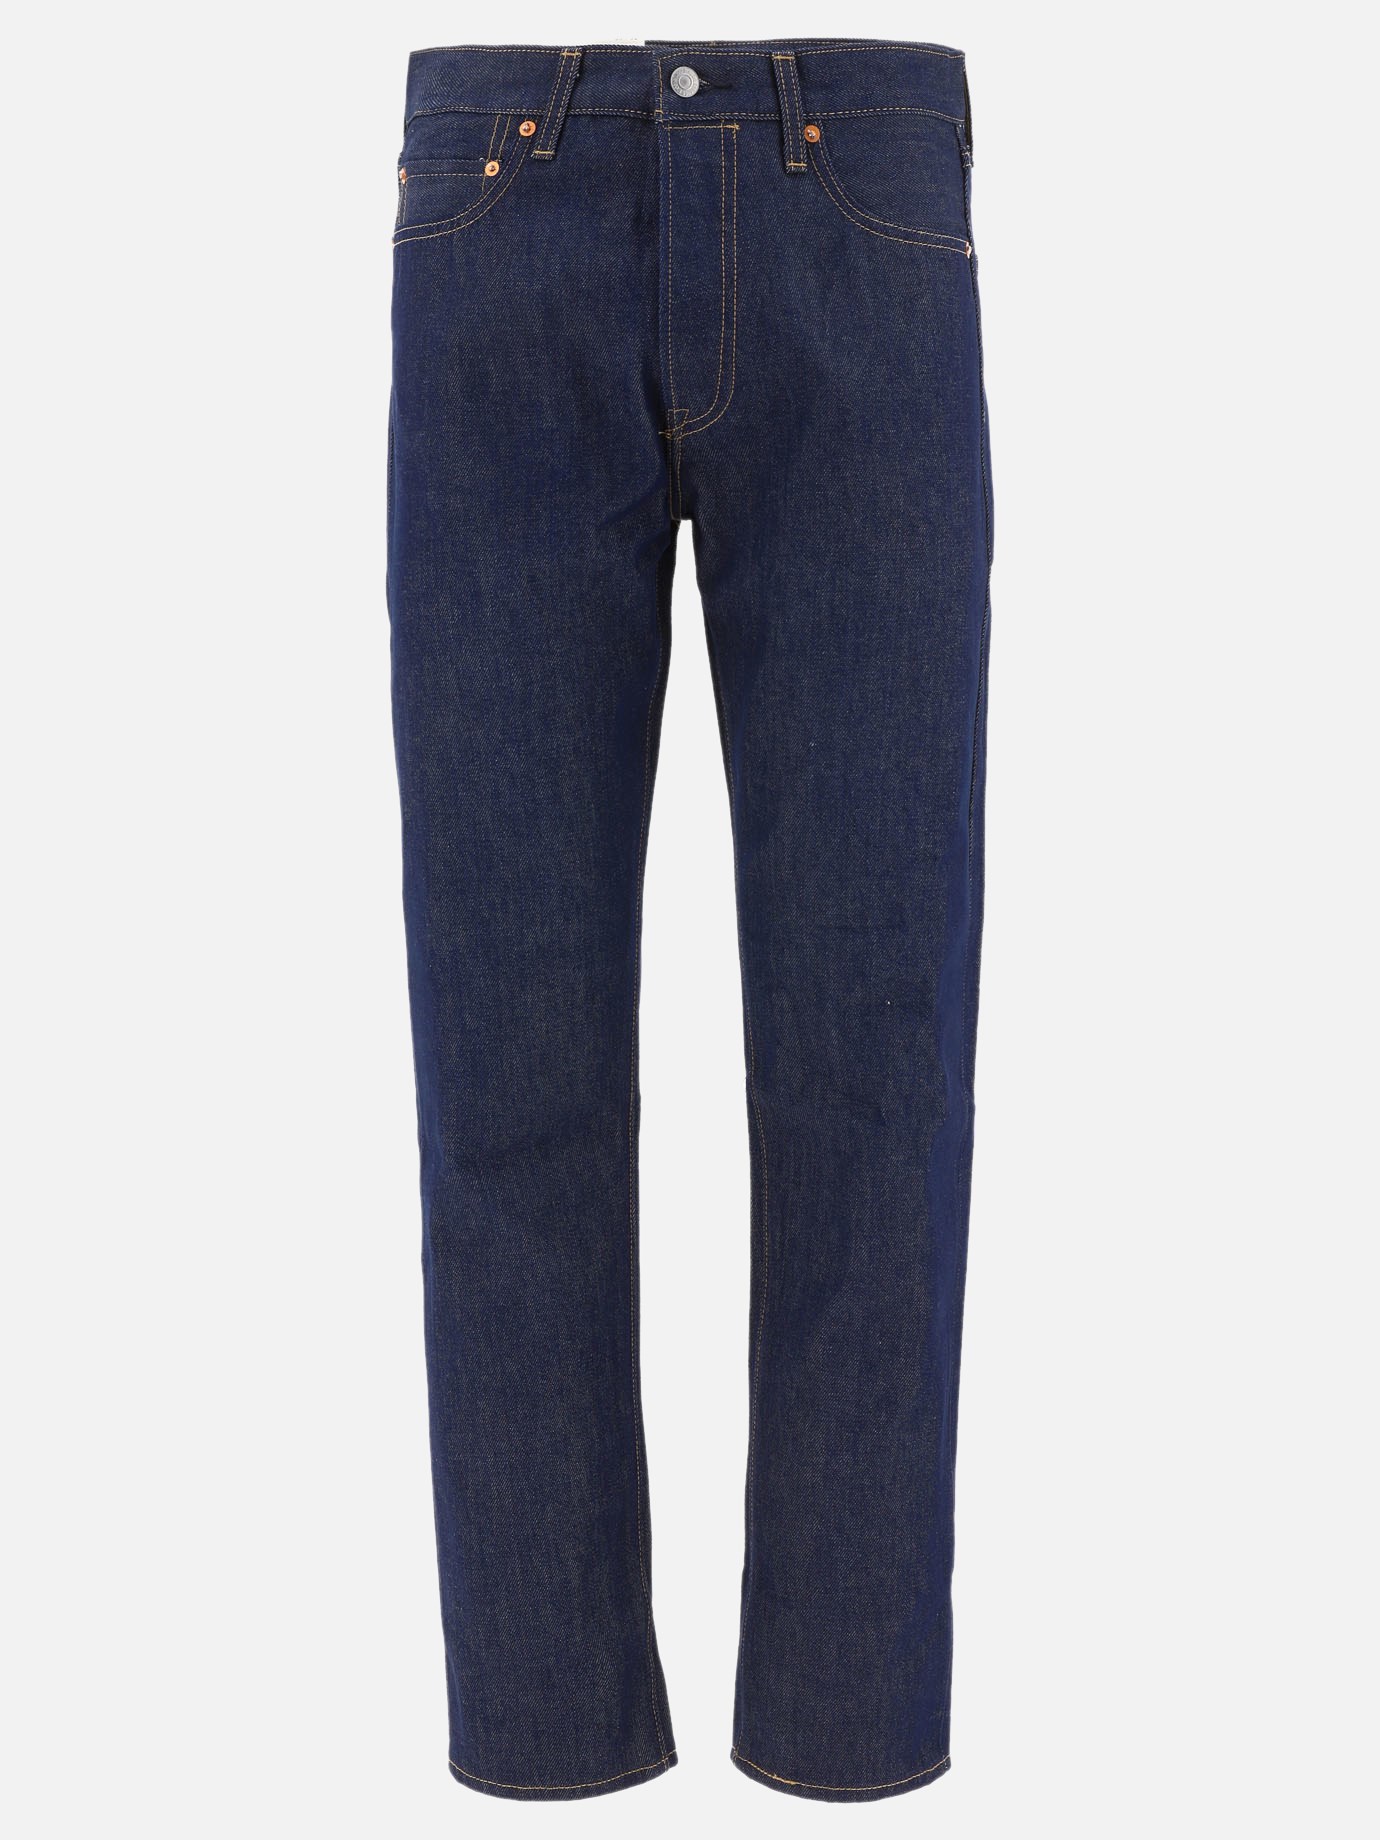 Jeans  501 by Levi's Made & Crafted - 5